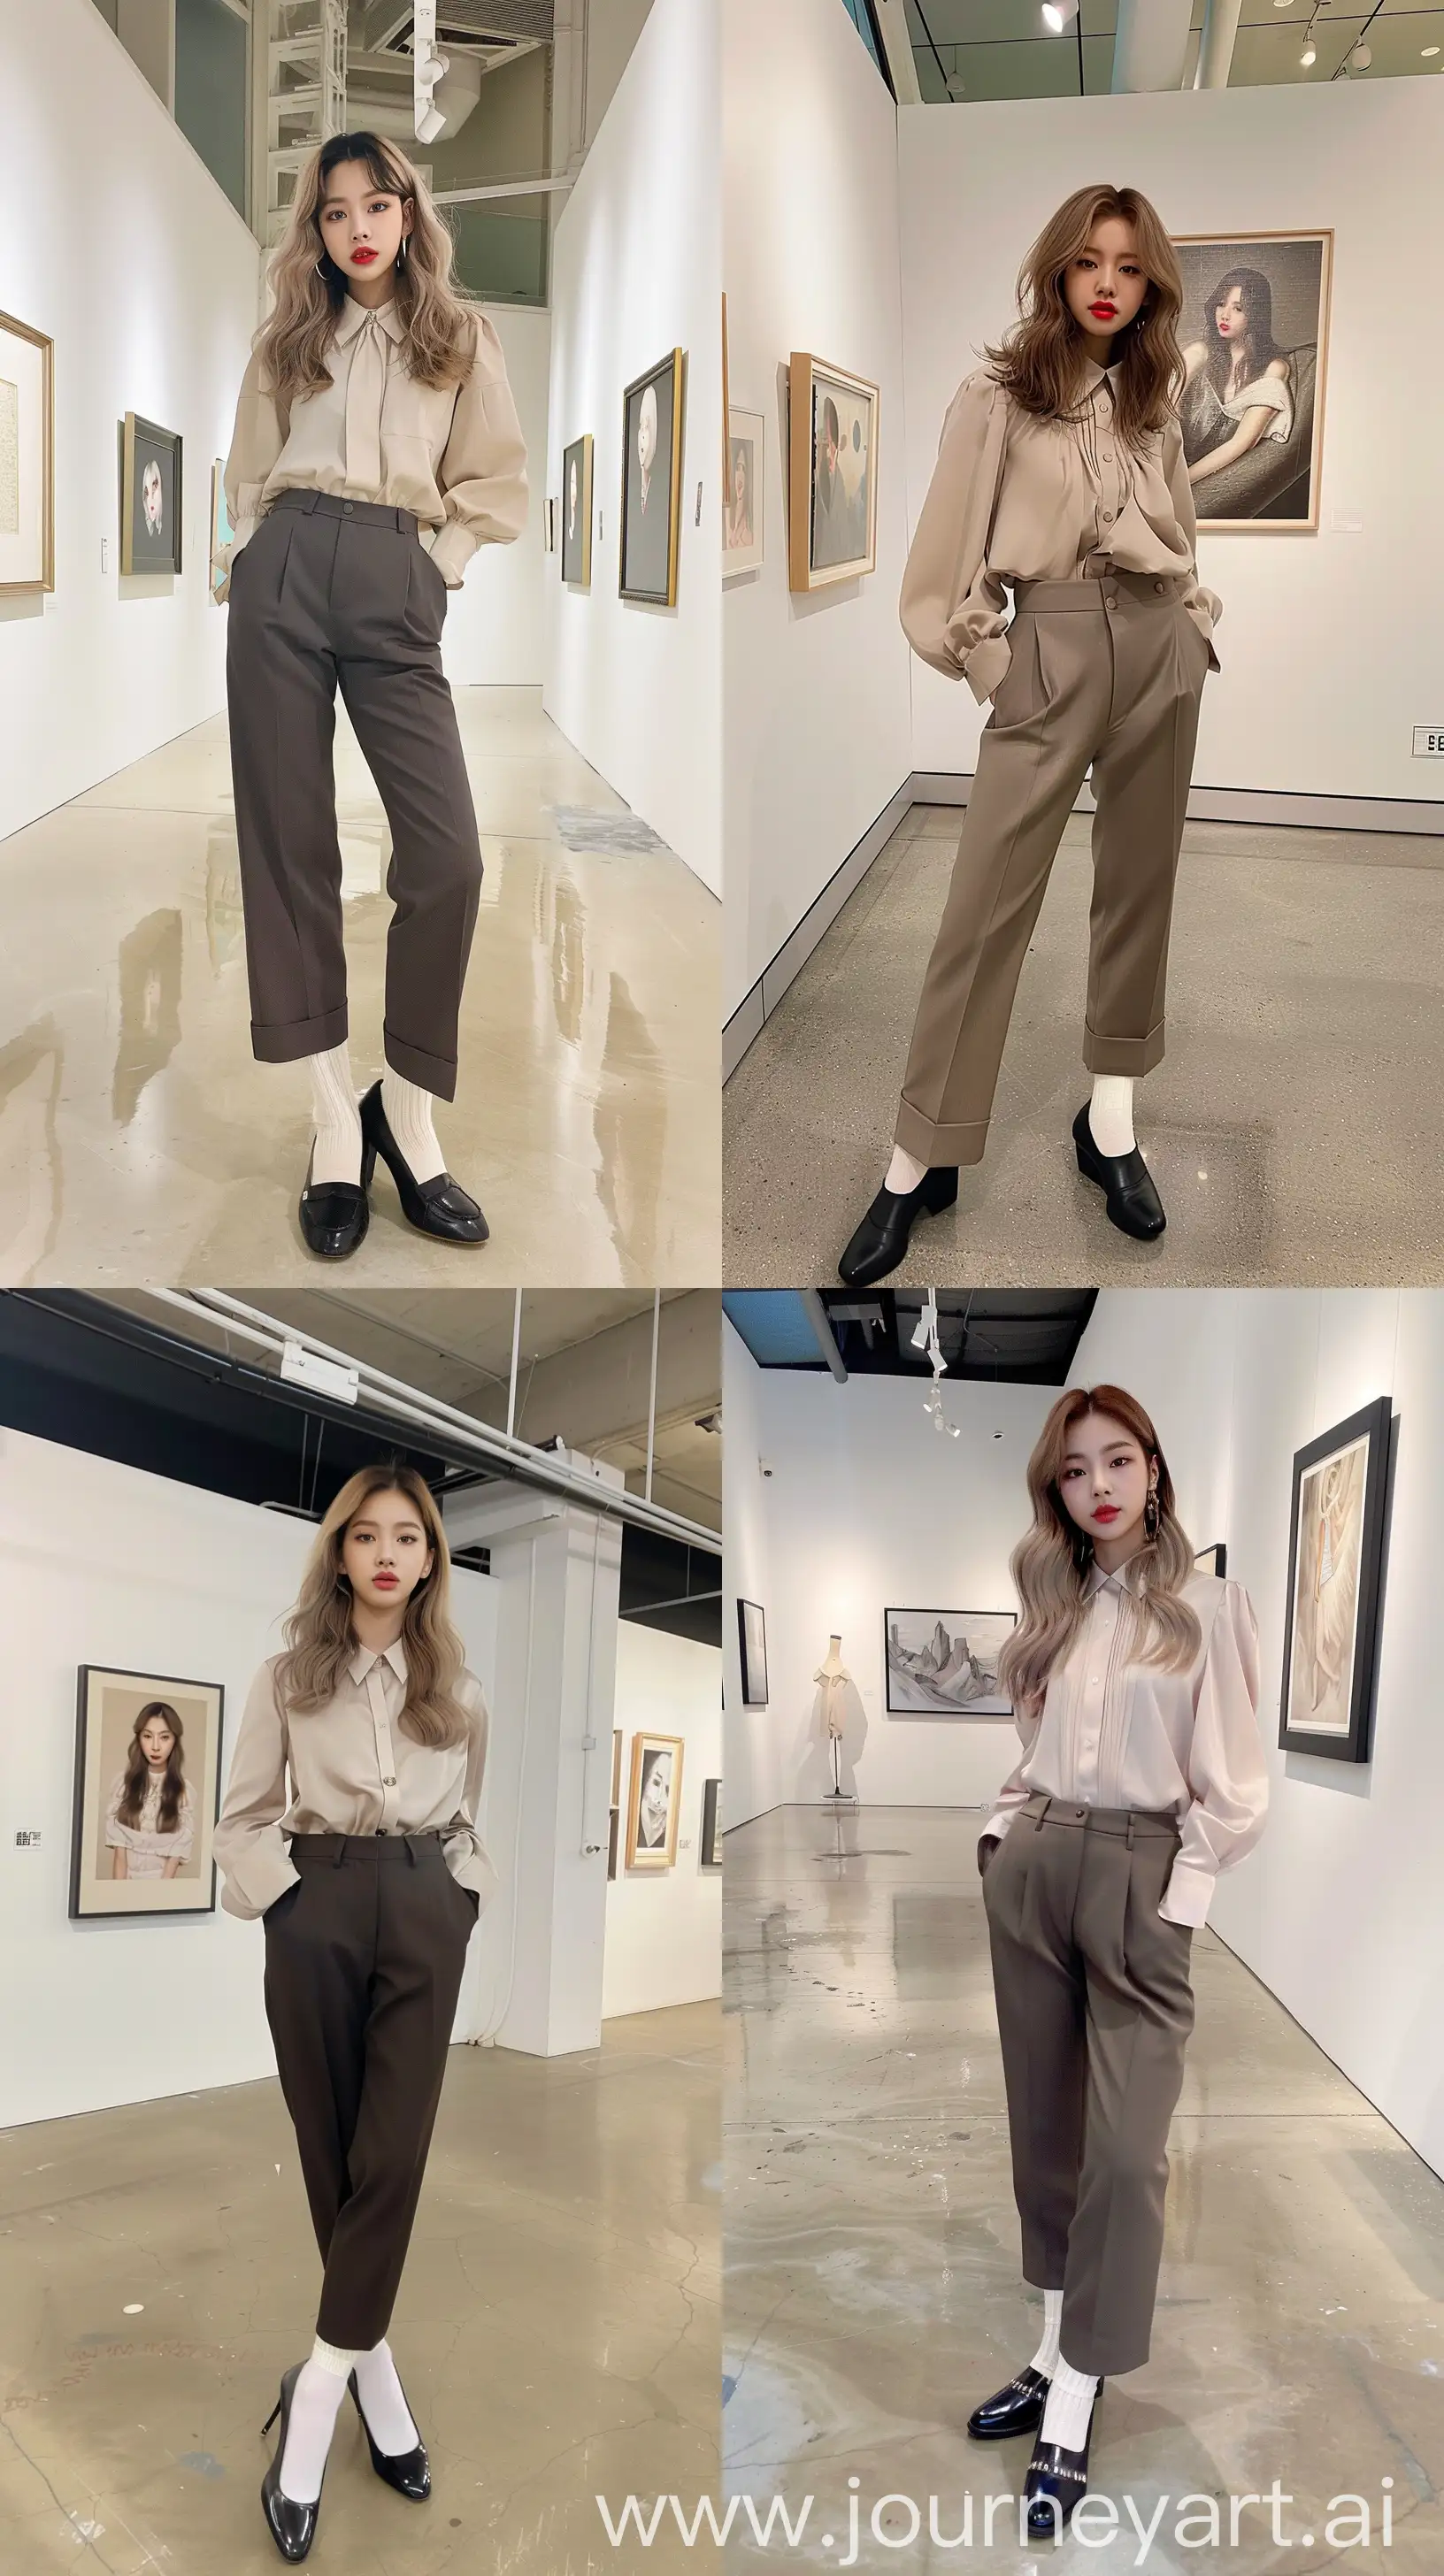 a selfie blackpink's jennie, medium wavy wolfcut hair, wearing simple blouse and suit pants, black loafers shoes, white socks, standing in art gallery --ar 9:16